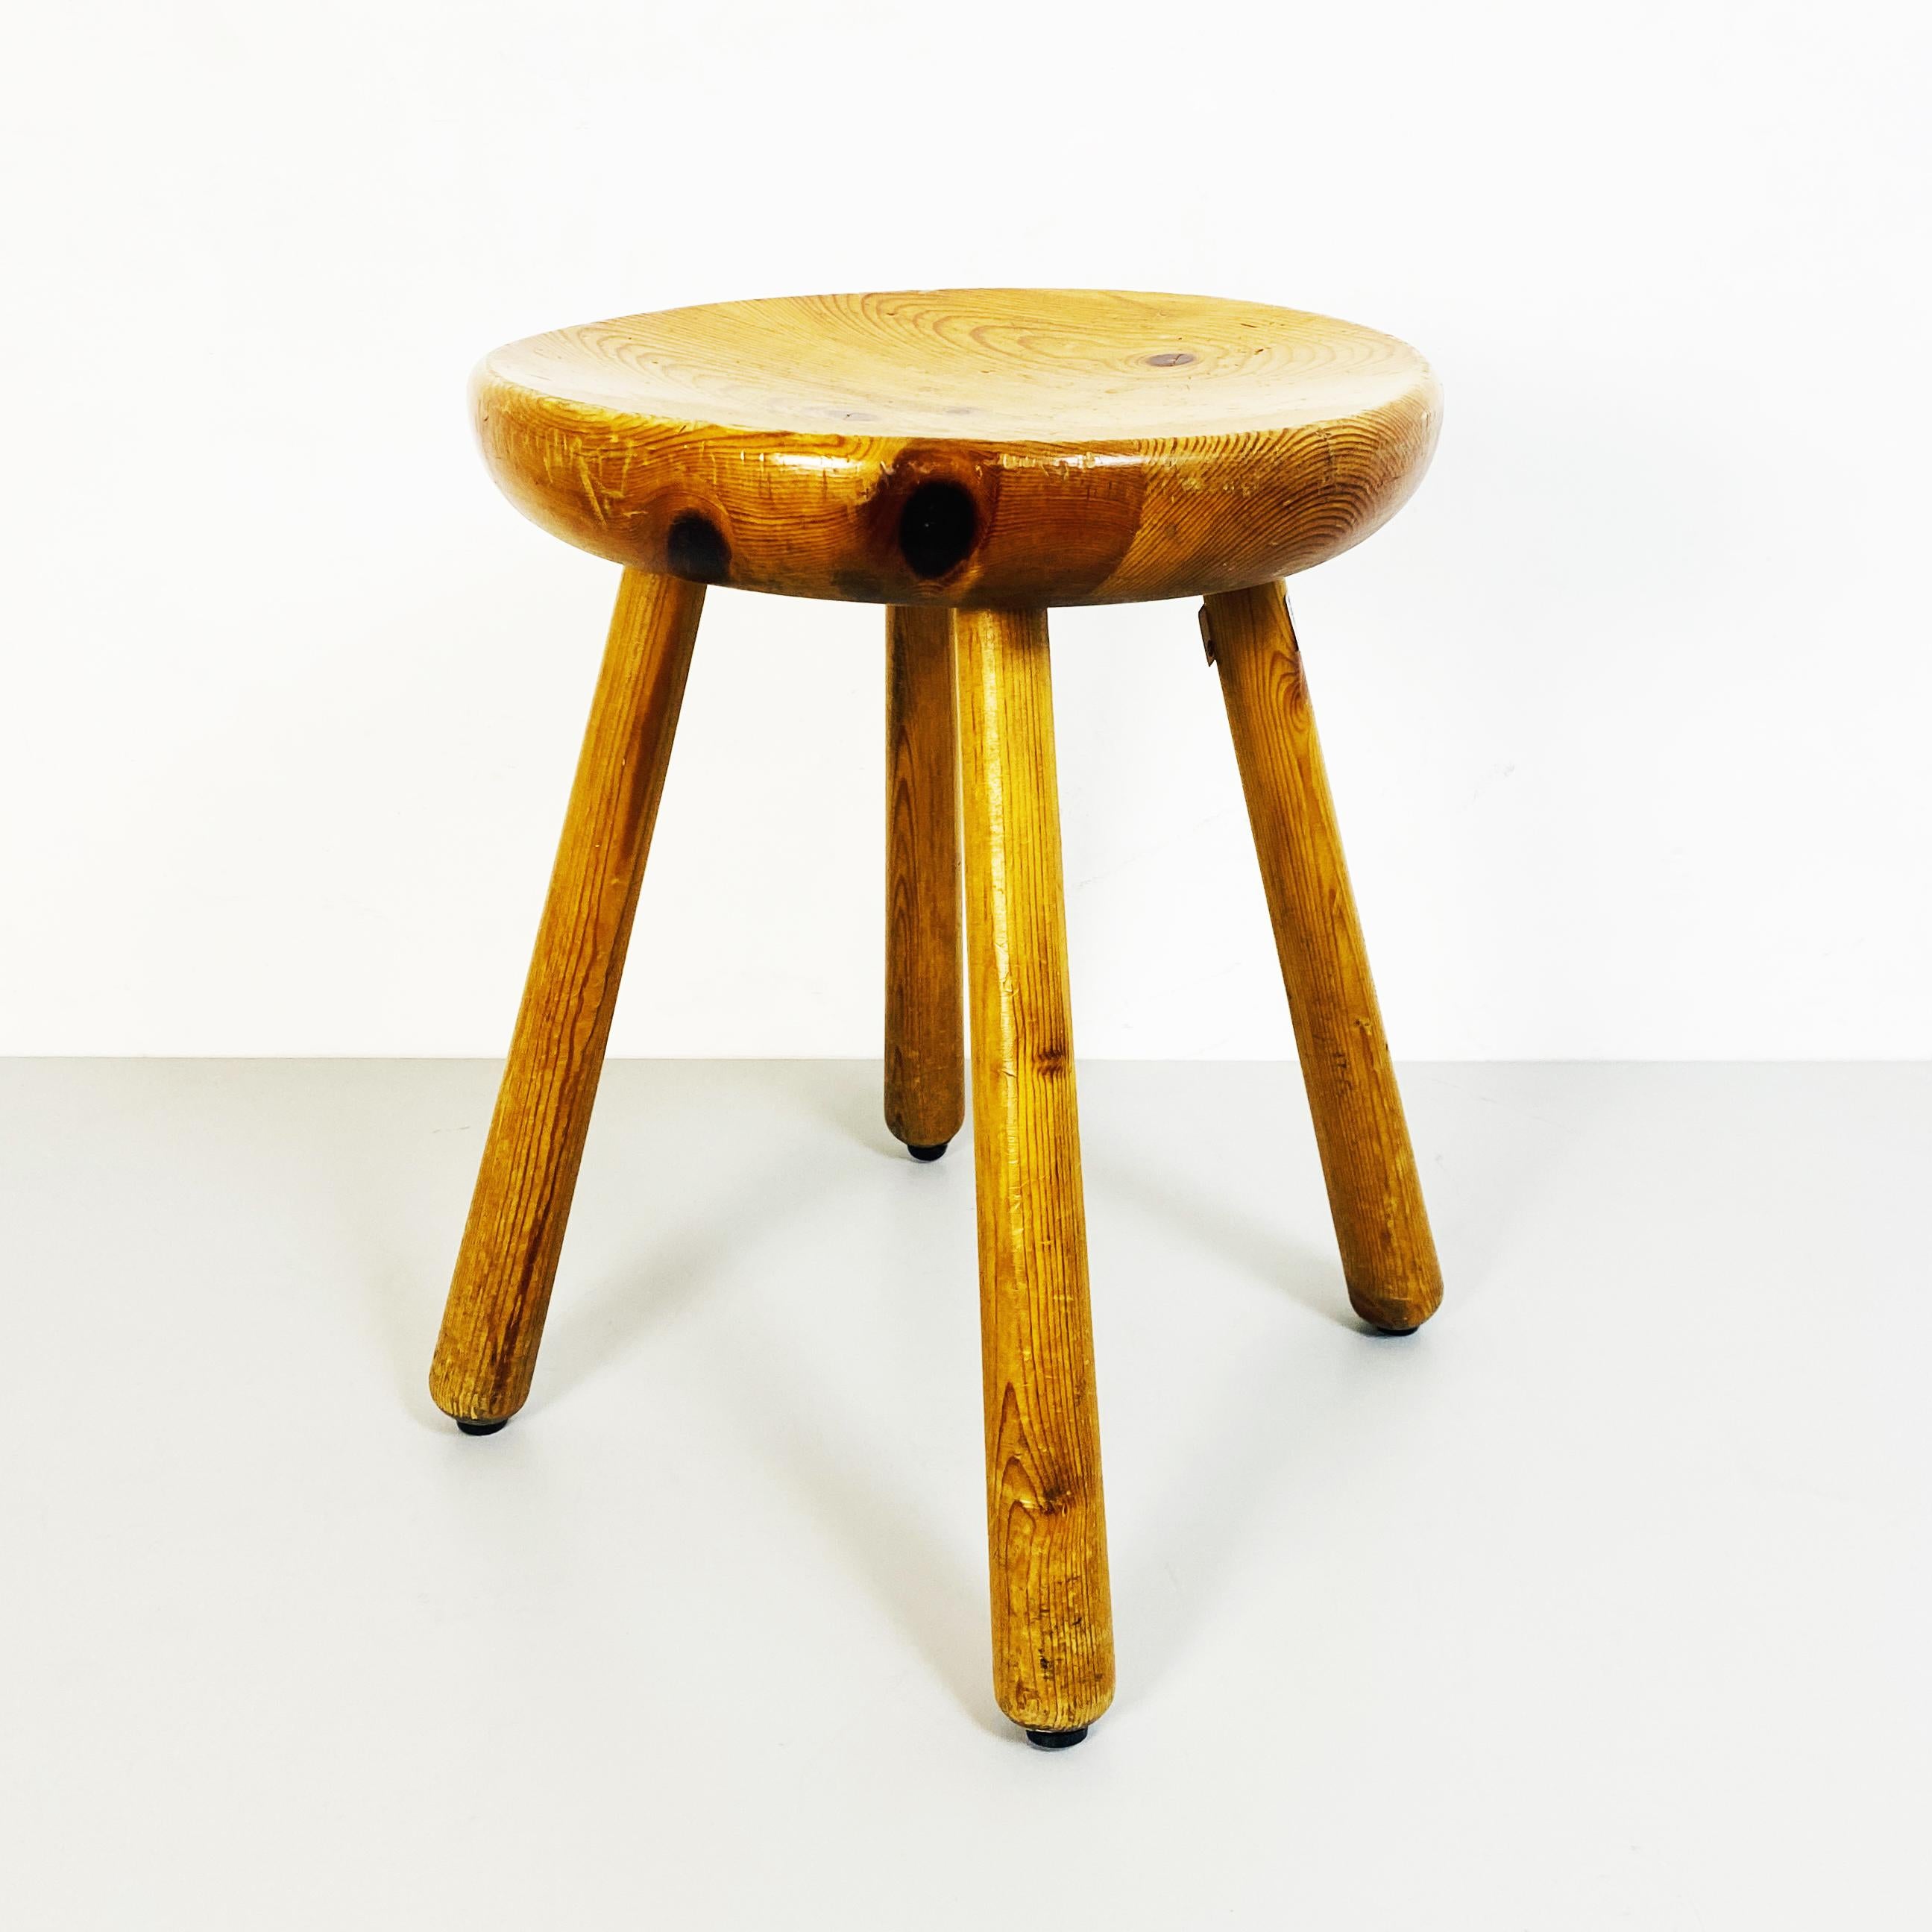 Italian mid-century Rustic wooden stool, 1960s
Rustic stool in wood with round seat and four legs with circular section.
1960s
Good conditions, signs of aging
Measures in cm 48 x 48 H.